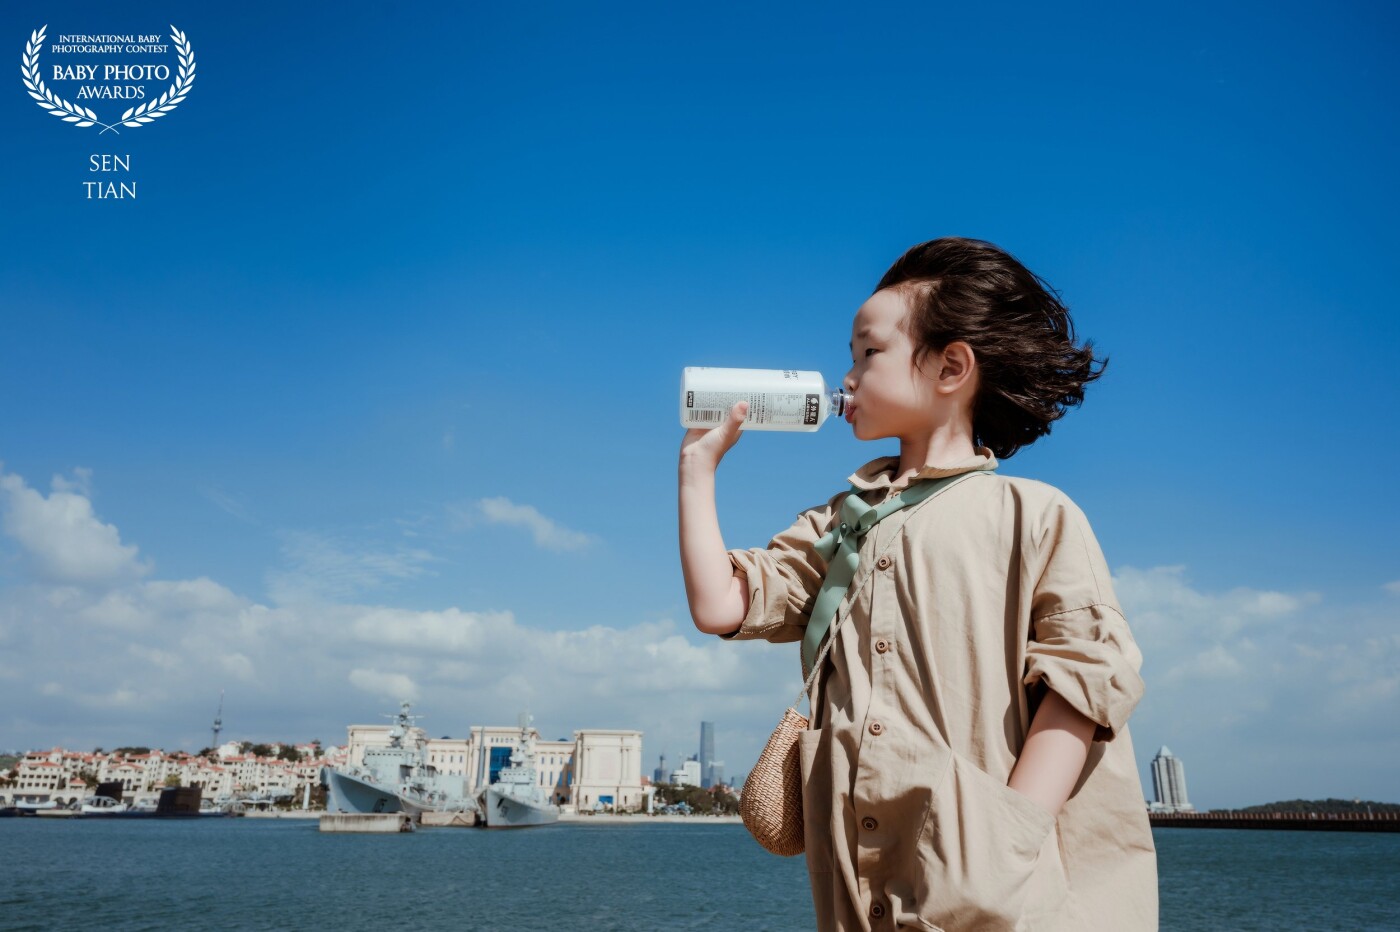 Drink in the wind. In summer, we came to the island. The child ran happily along the dam. When she was tired, she came back for water. The gentle sea breeze blew her hair that day, which was very comfortable. We caught the moment.